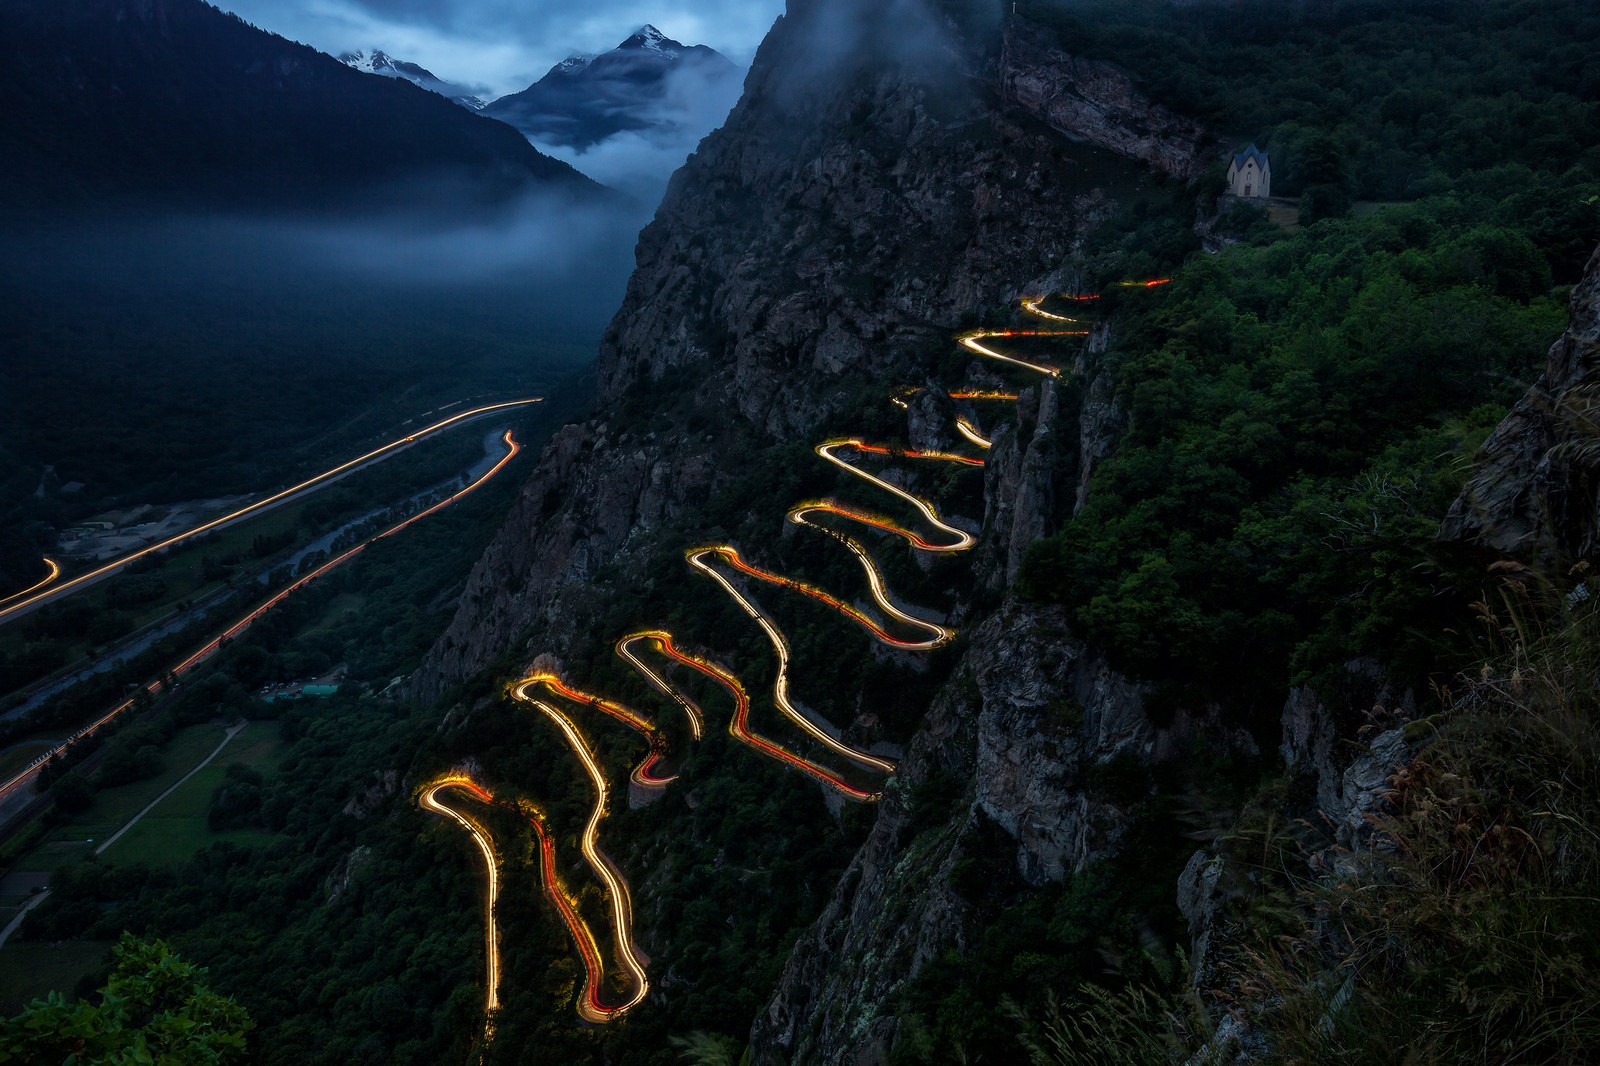 General 1600x1066 landscape lights car long exposure mountains clouds mist rocks valley road trees evening hairpin turns France